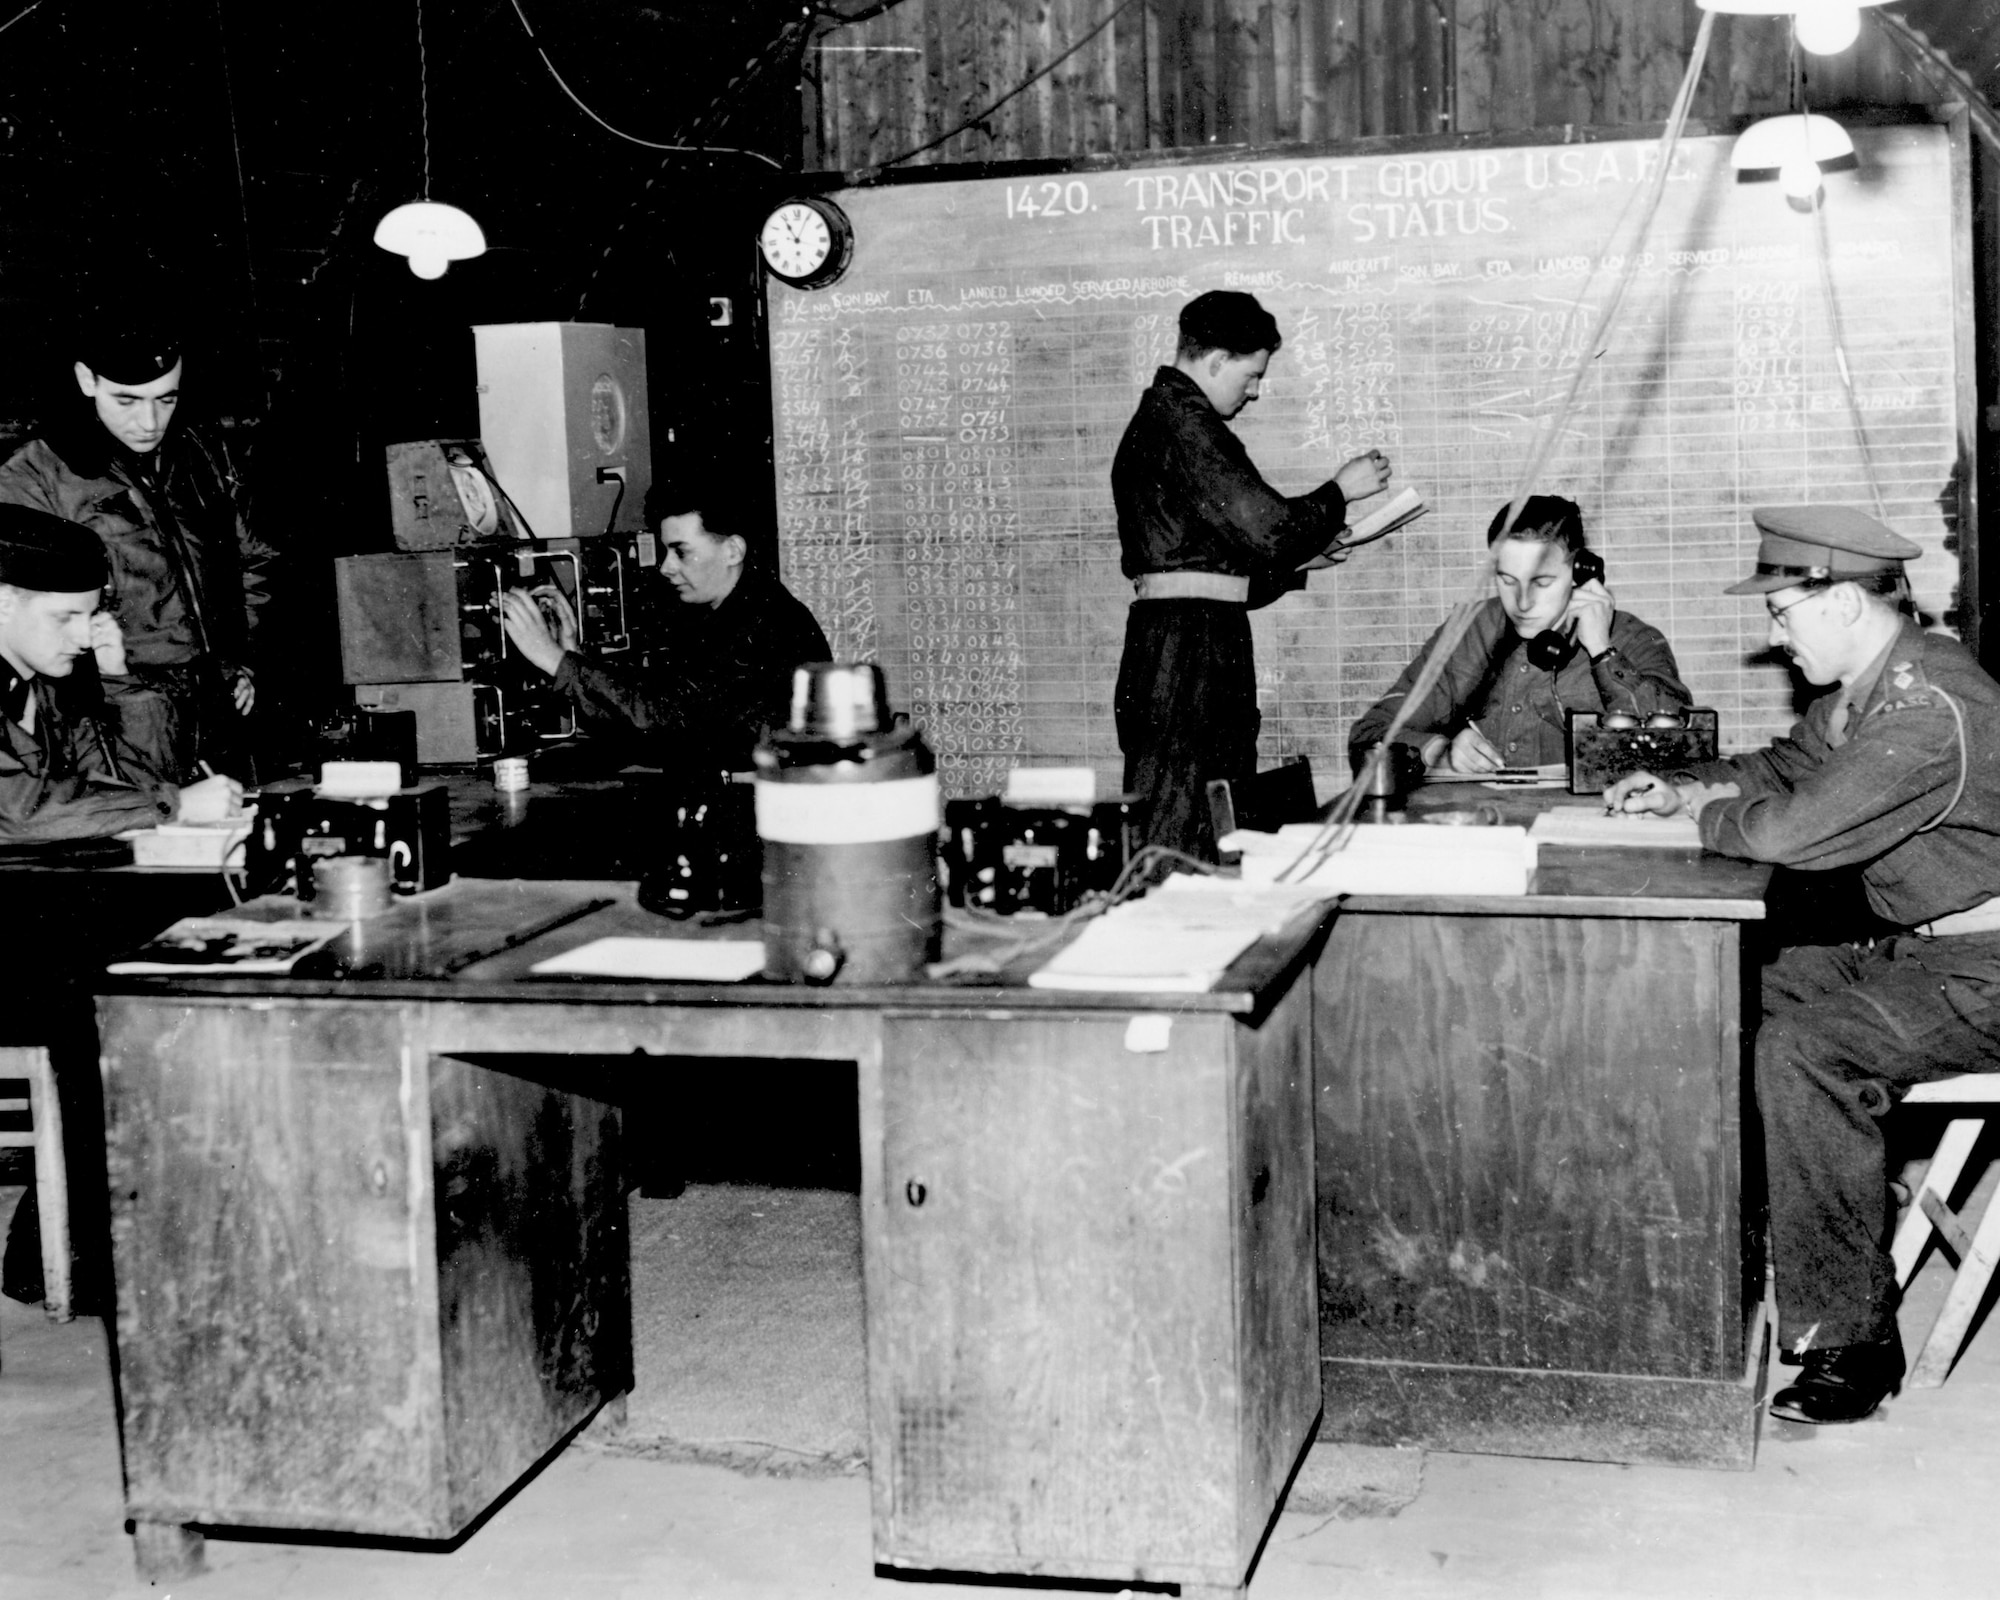 Radio calls from incoming aircraft were monitored by personnel at the traffic control point during the Berlin Airlift in 1948. The traffic control point used this information to help facilitate loading operations. Pictured are from Left to right: Lt. Howard L. Pruden, Lt. Ralph A. Lerch, Driver Peter K. Davis, Driver James Anderson, Lance Cpl. Horton Albert, Capt. Donald Barker. (Courtesy photo)